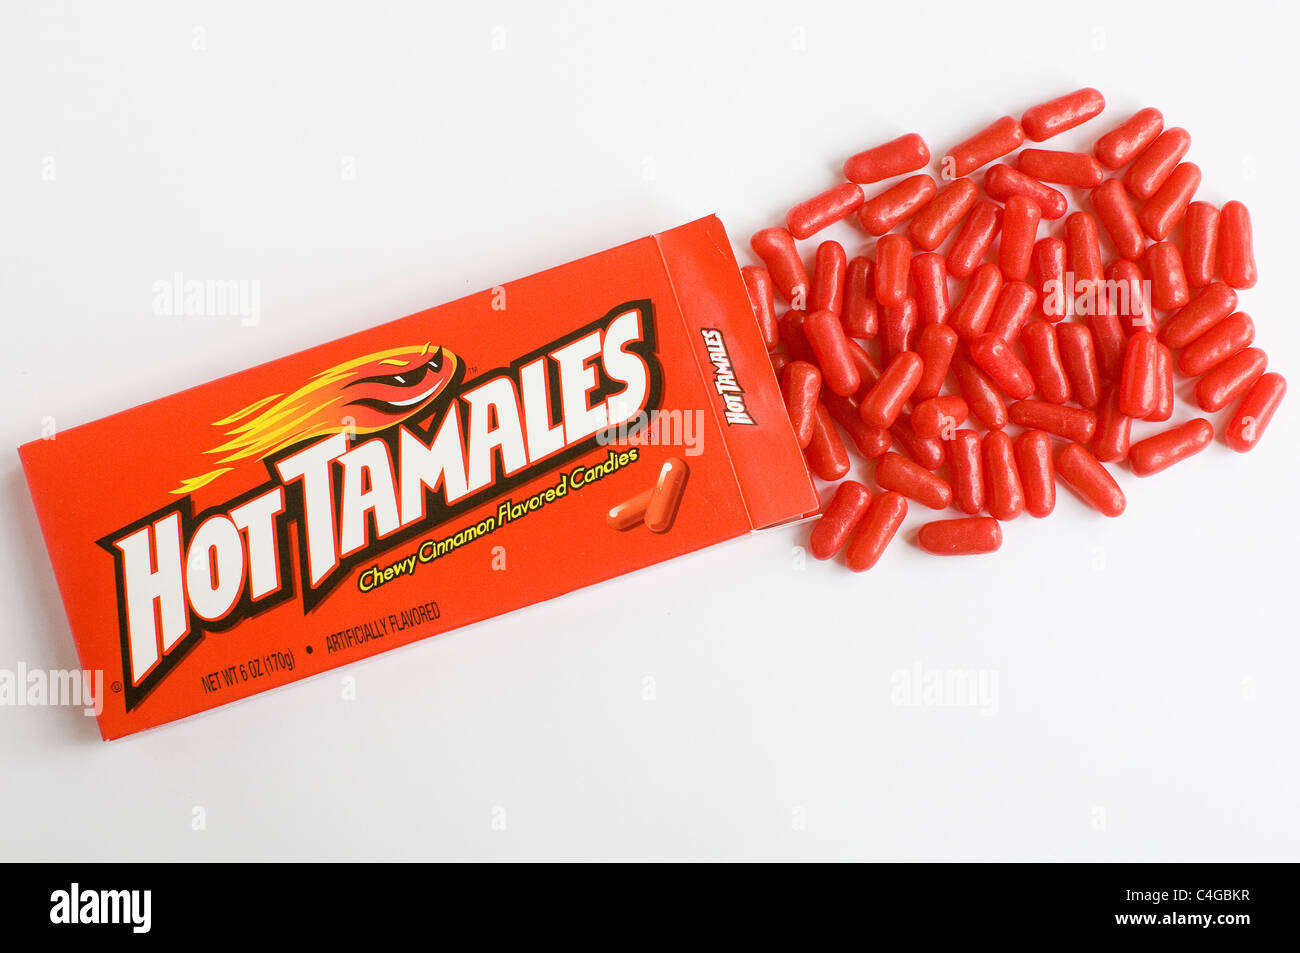 Hot Tamales candy. Foto Stock